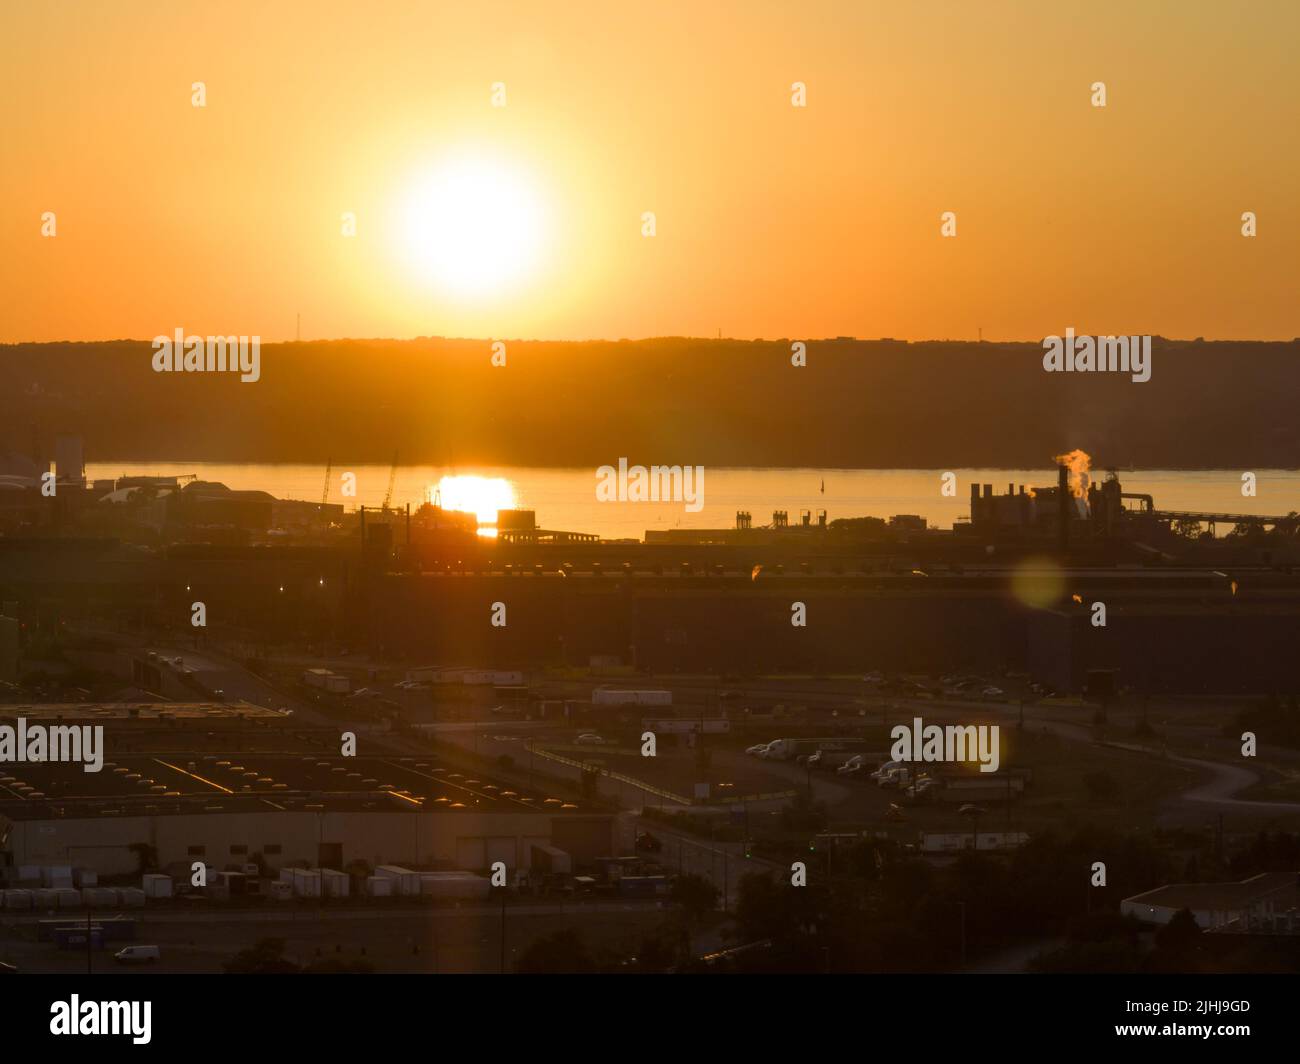 An aerial view looking towards sunset on a large industrial manufacturing area. Stock Photo